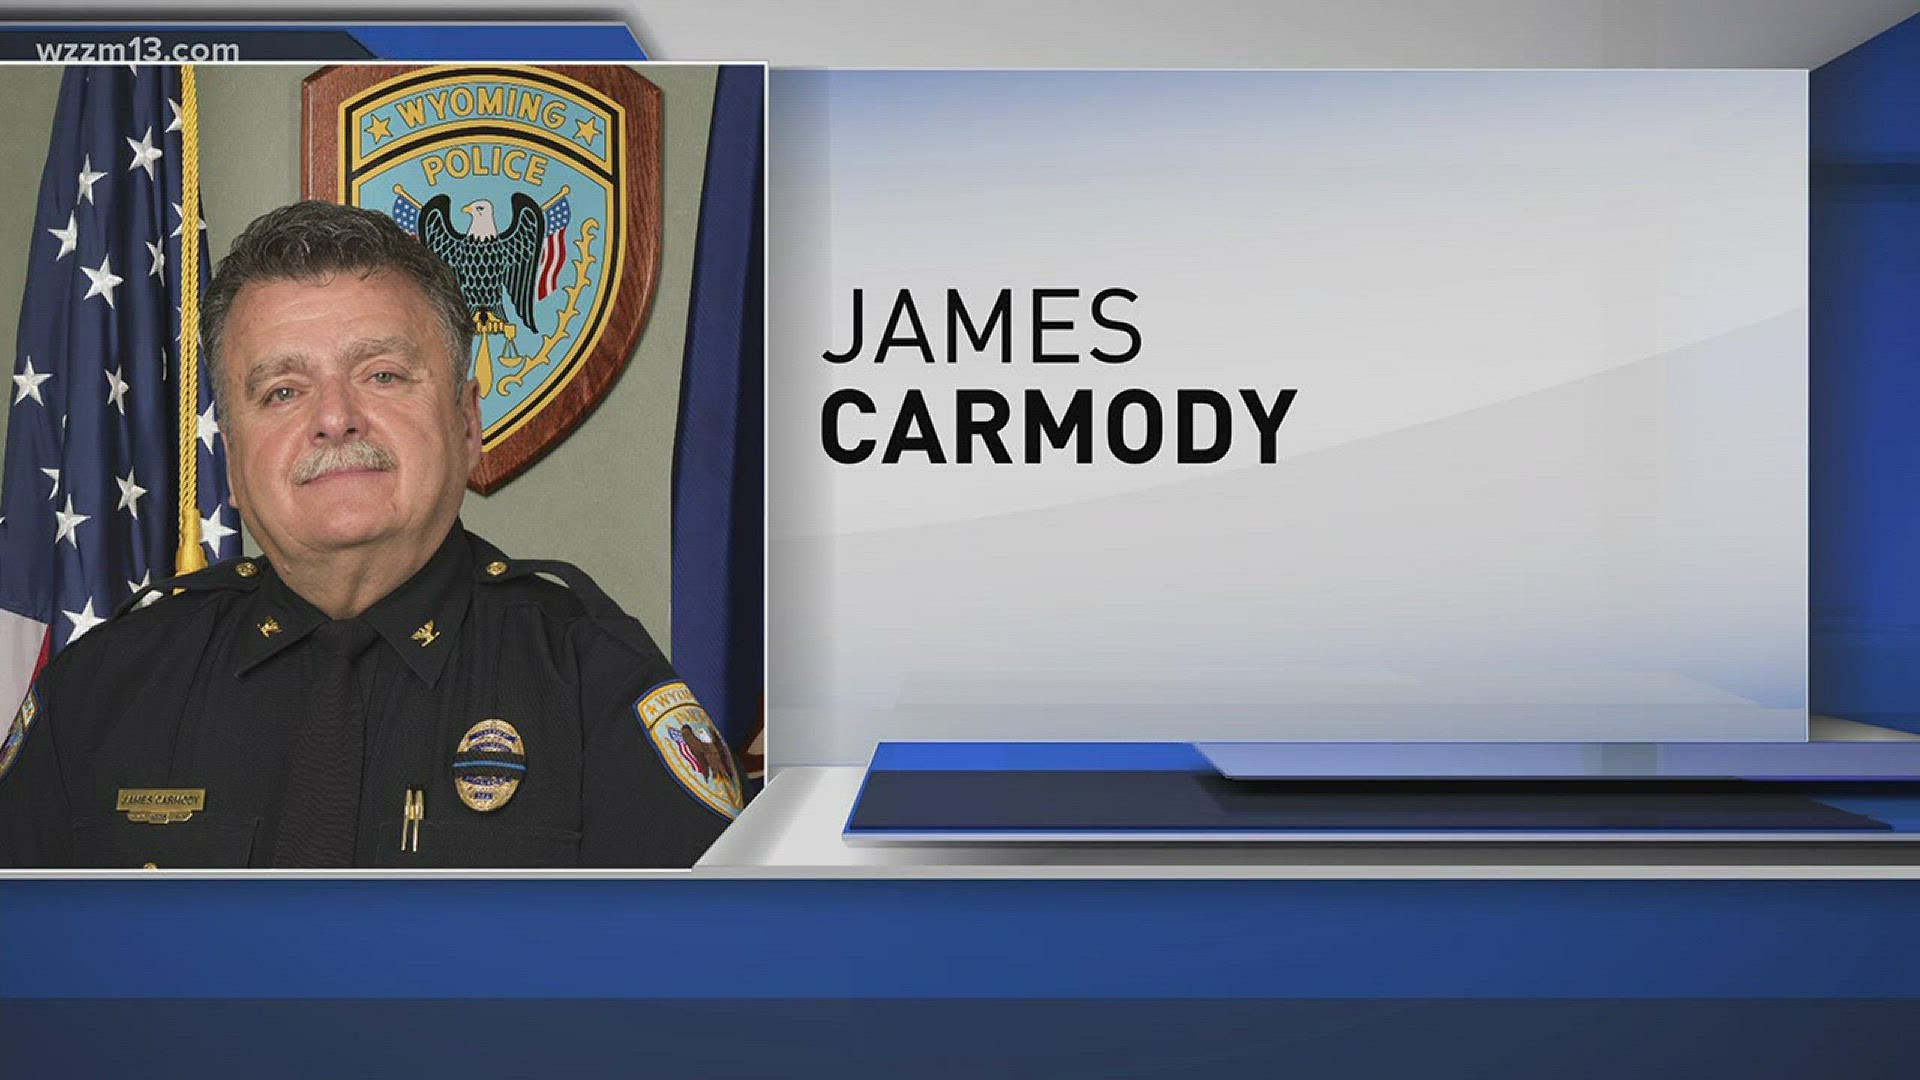 Wyoming's Police ad Fire Chief James Carmody retiring in April